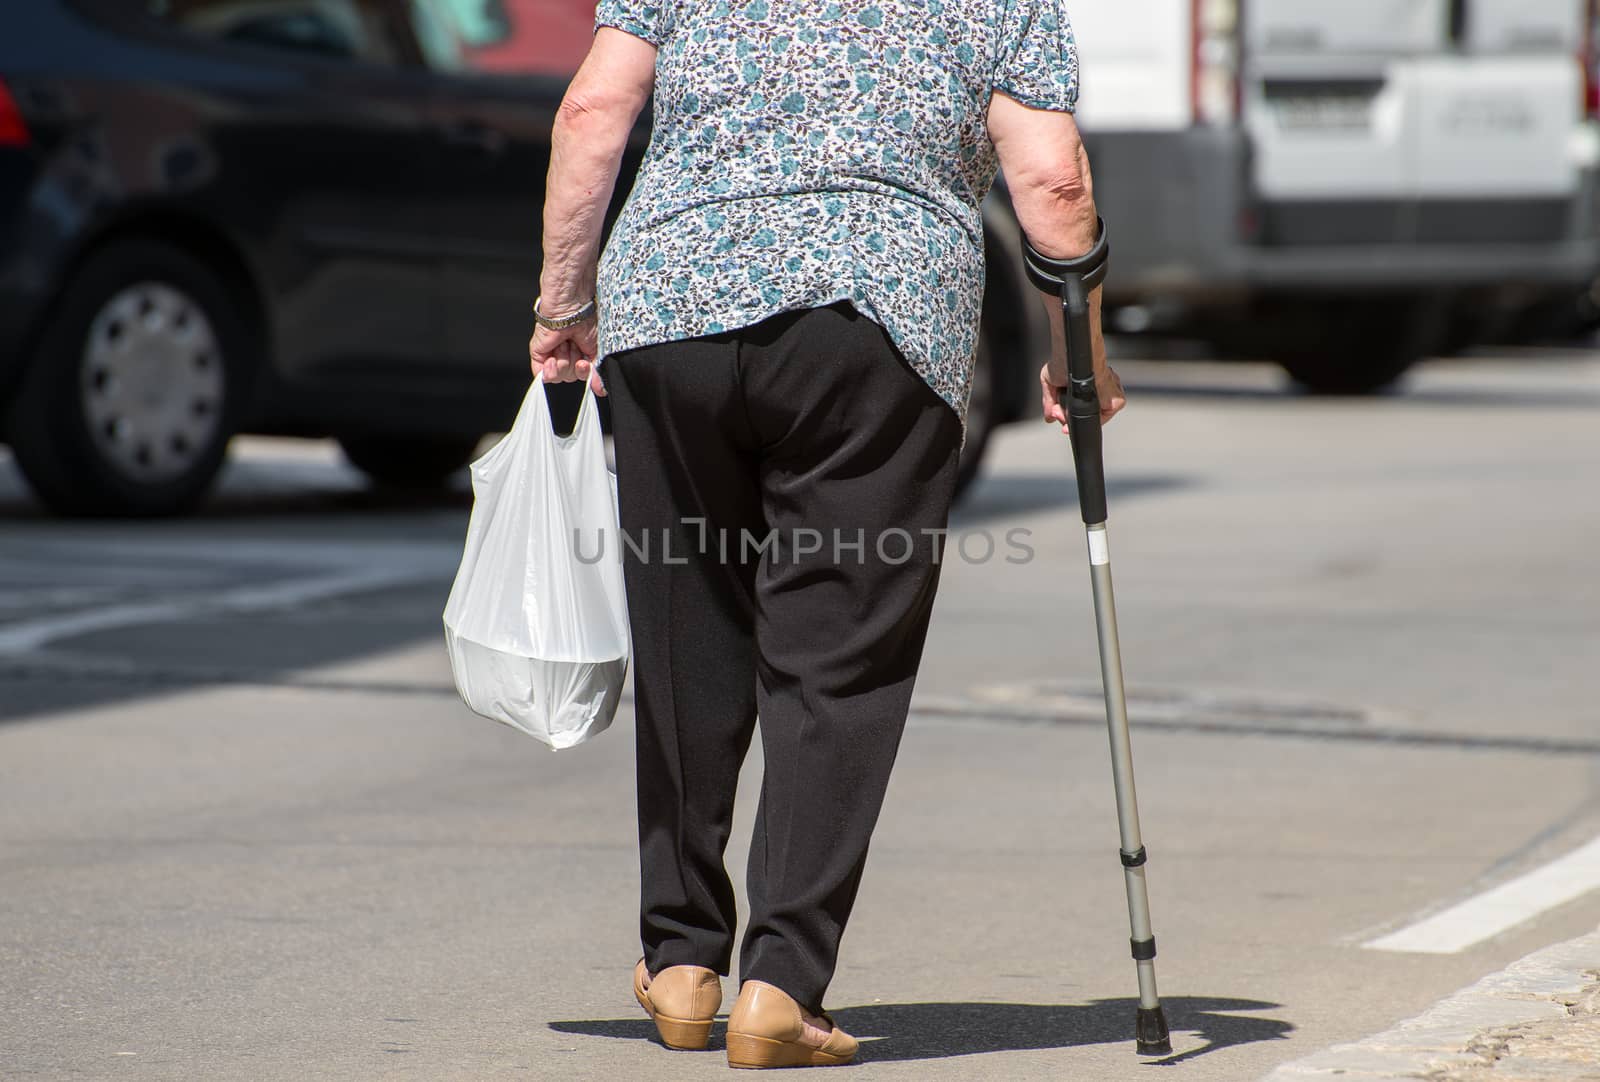 Elderly woman with crutch on the street.